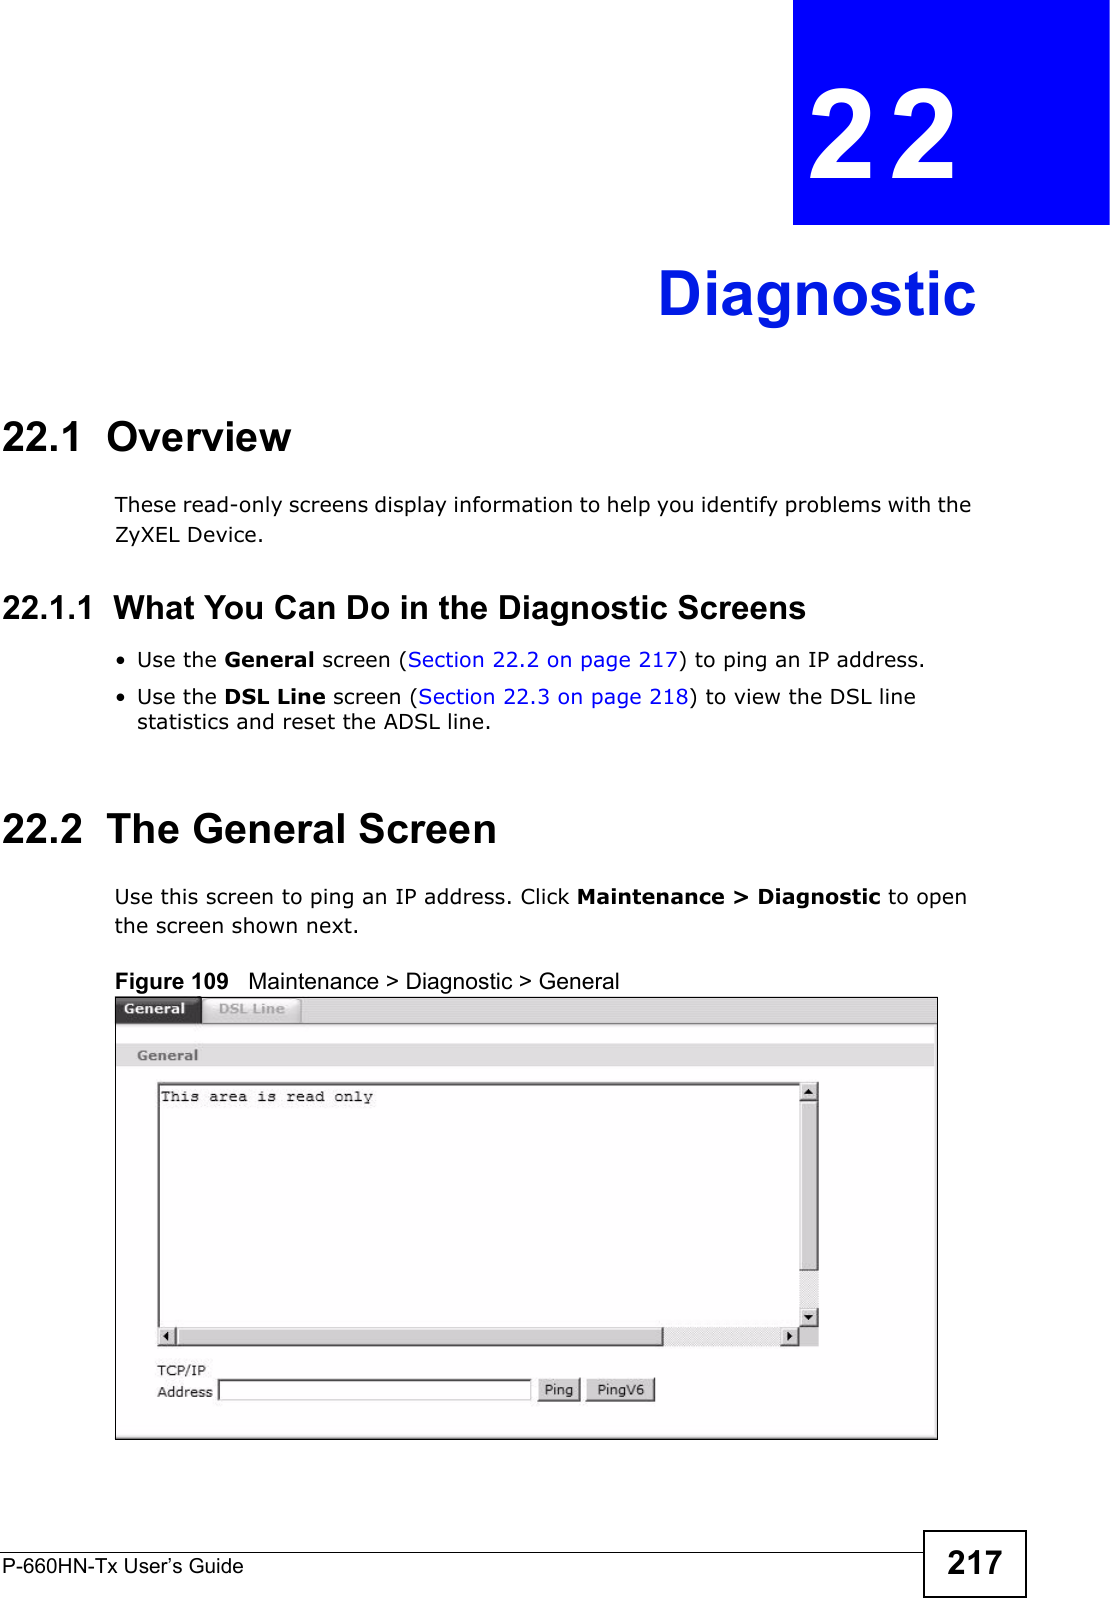 P-660HN-Tx User’s Guide 217CHAPTER  22 Diagnostic22.1  OverviewThese read-only screens display information to help you identify problems with the ZyXEL Device.22.1.1  What You Can Do in the Diagnostic Screens•Use the General screen (Section 22.2 on page 217) to ping an IP address.•Use the DSL Line screen (Section 22.3 on page 218) to view the DSL line statistics and reset the ADSL line.22.2  The General Screen Use this screen to ping an IP address. Click Maintenance &gt; Diagnostic to open the screen shown next.Figure 109   Maintenance &gt; Diagnostic &gt; General